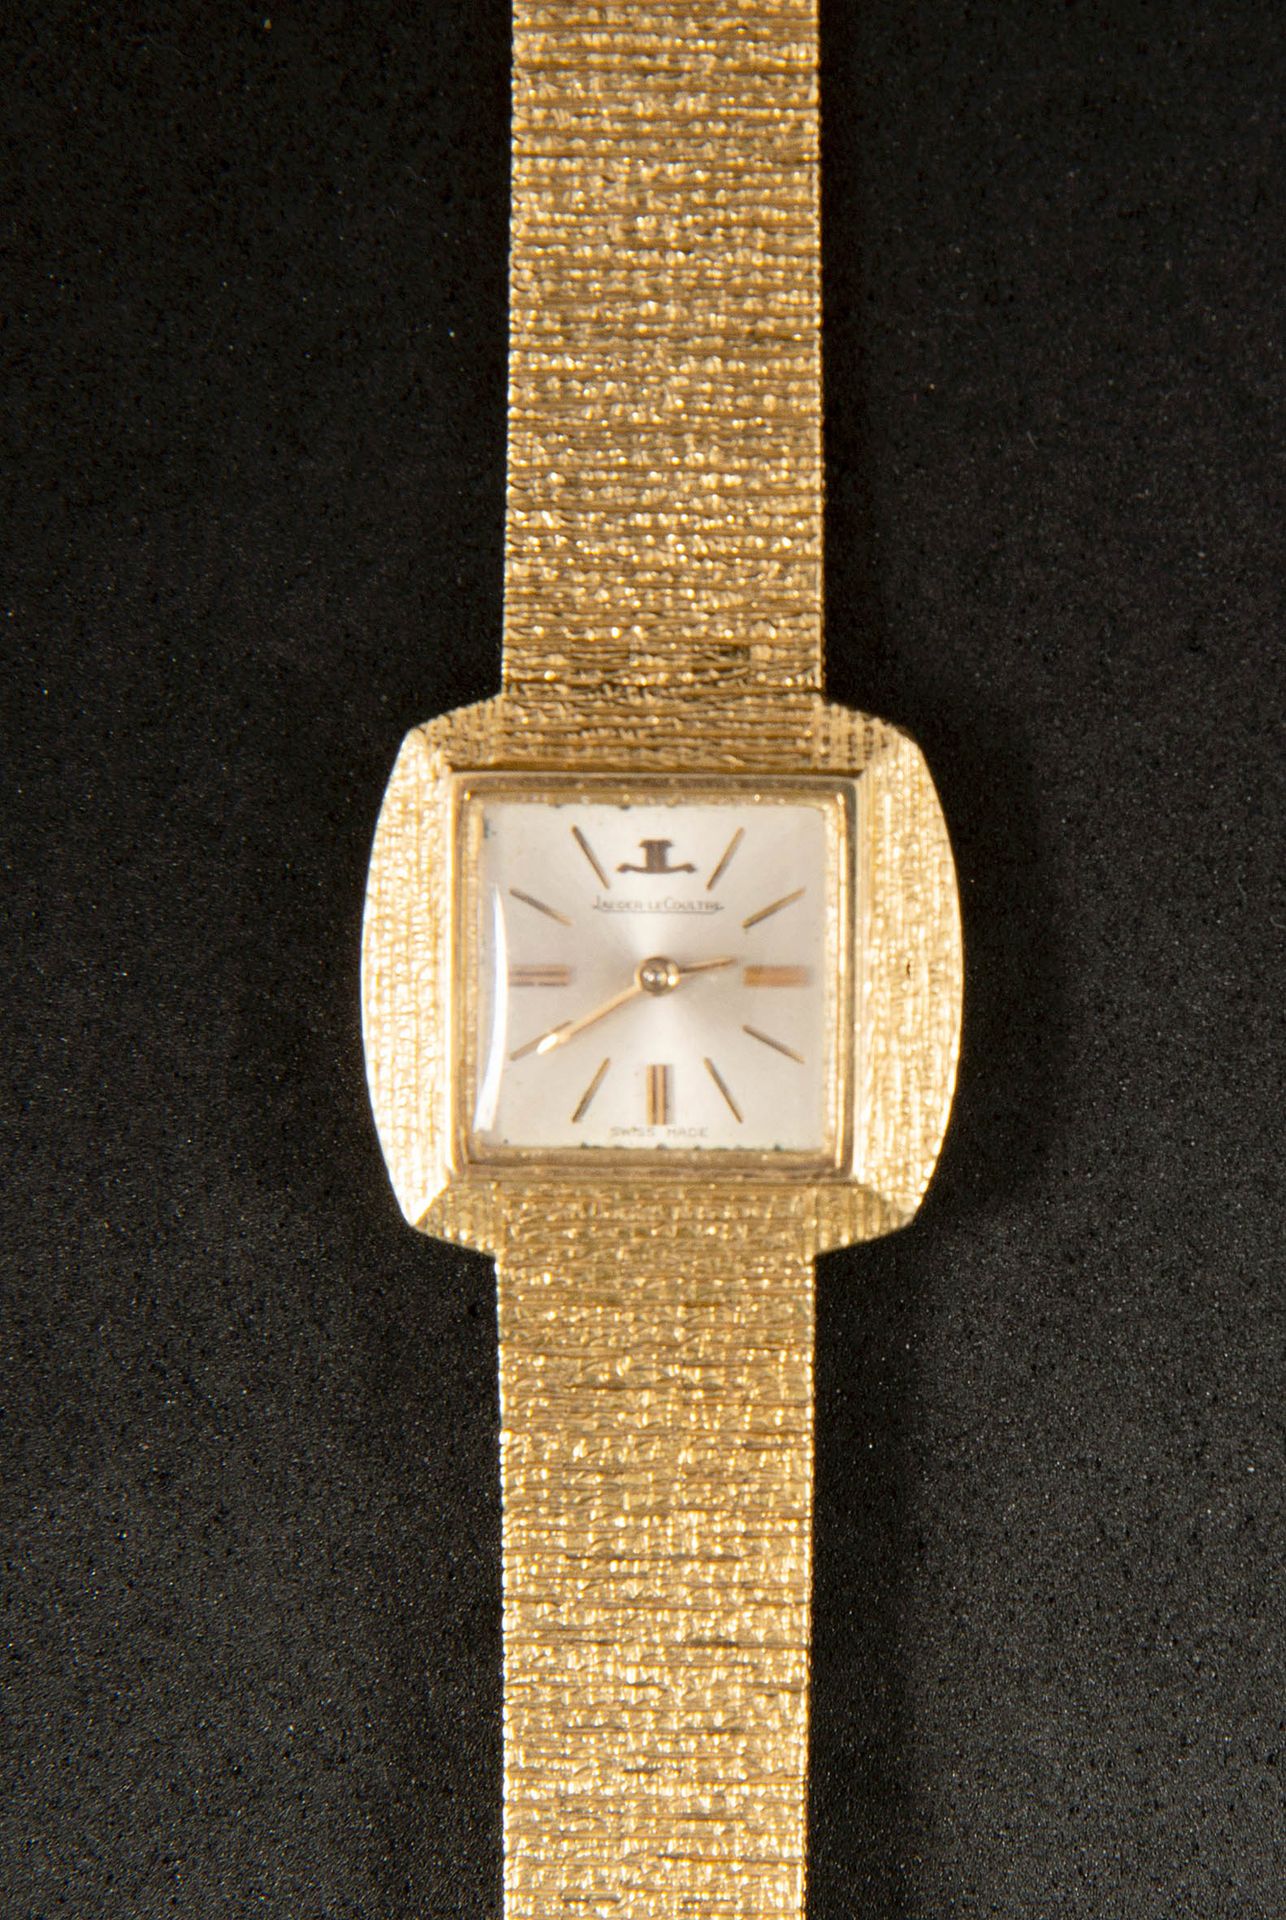 Null Ladies' watch in 18K yellow gold, Jaeger-LeCoultre brand. Mechanical moveme&hellip;